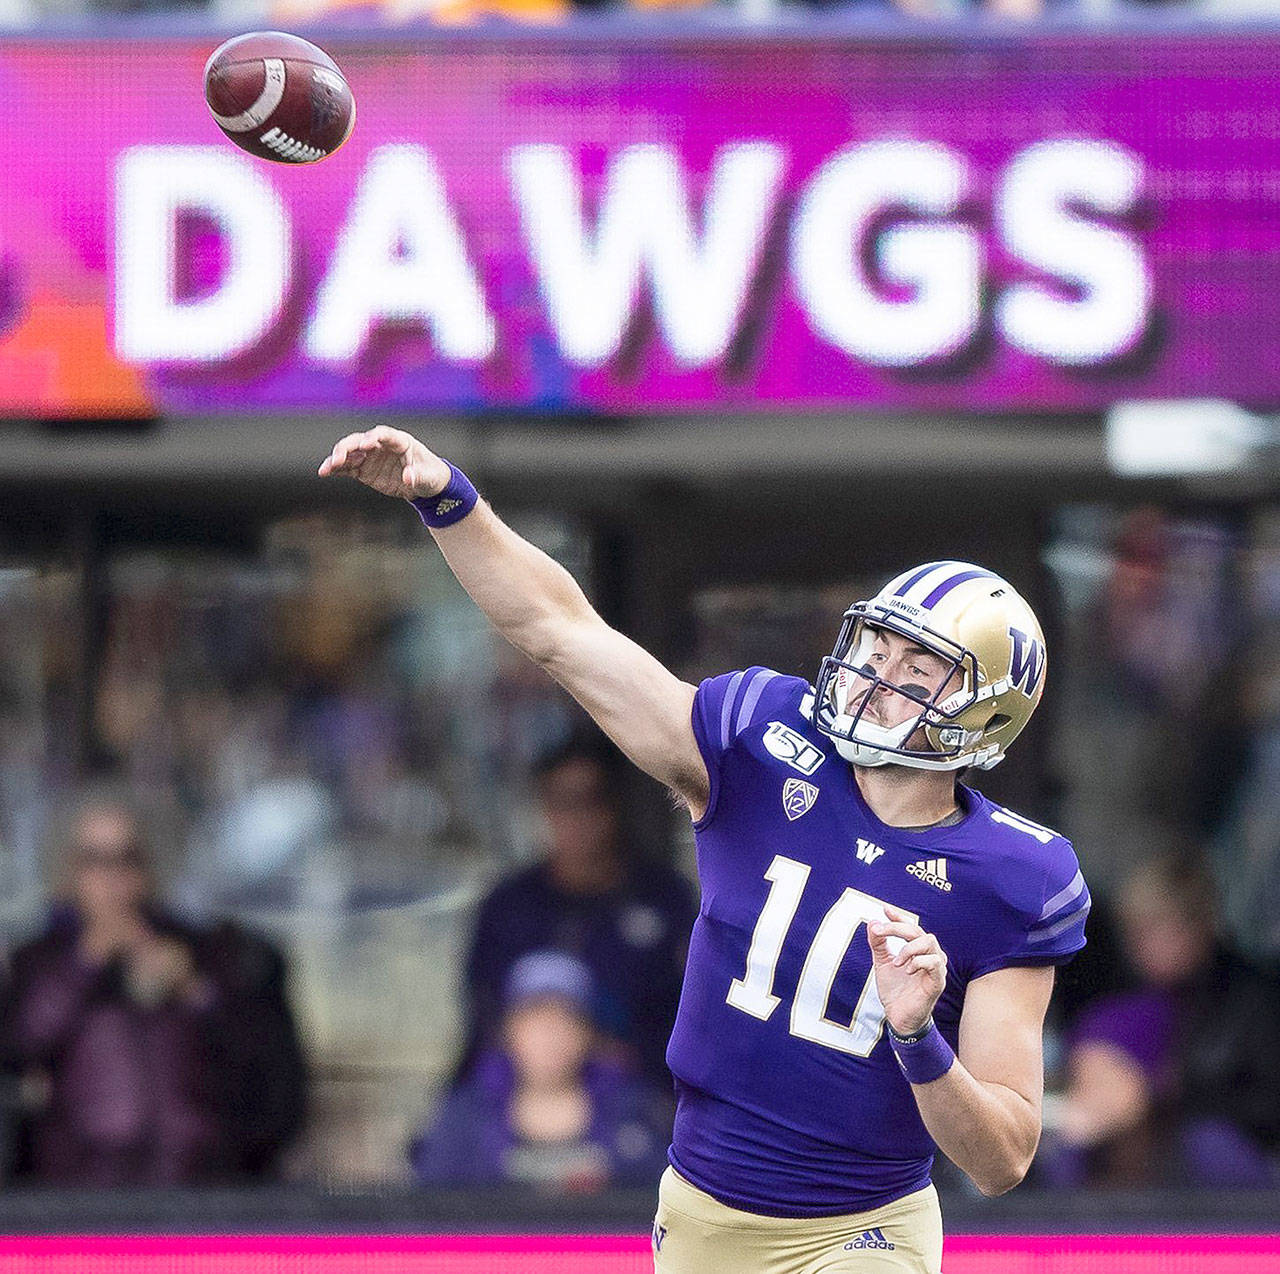 Andy Bao | Seattle Times/TNS Washington Huskies quarterback Jacob Eason (10) passes during the second half against USC on Saturday, Sept. 28, 2019 at Husky Stadium in Seattle, Wash.